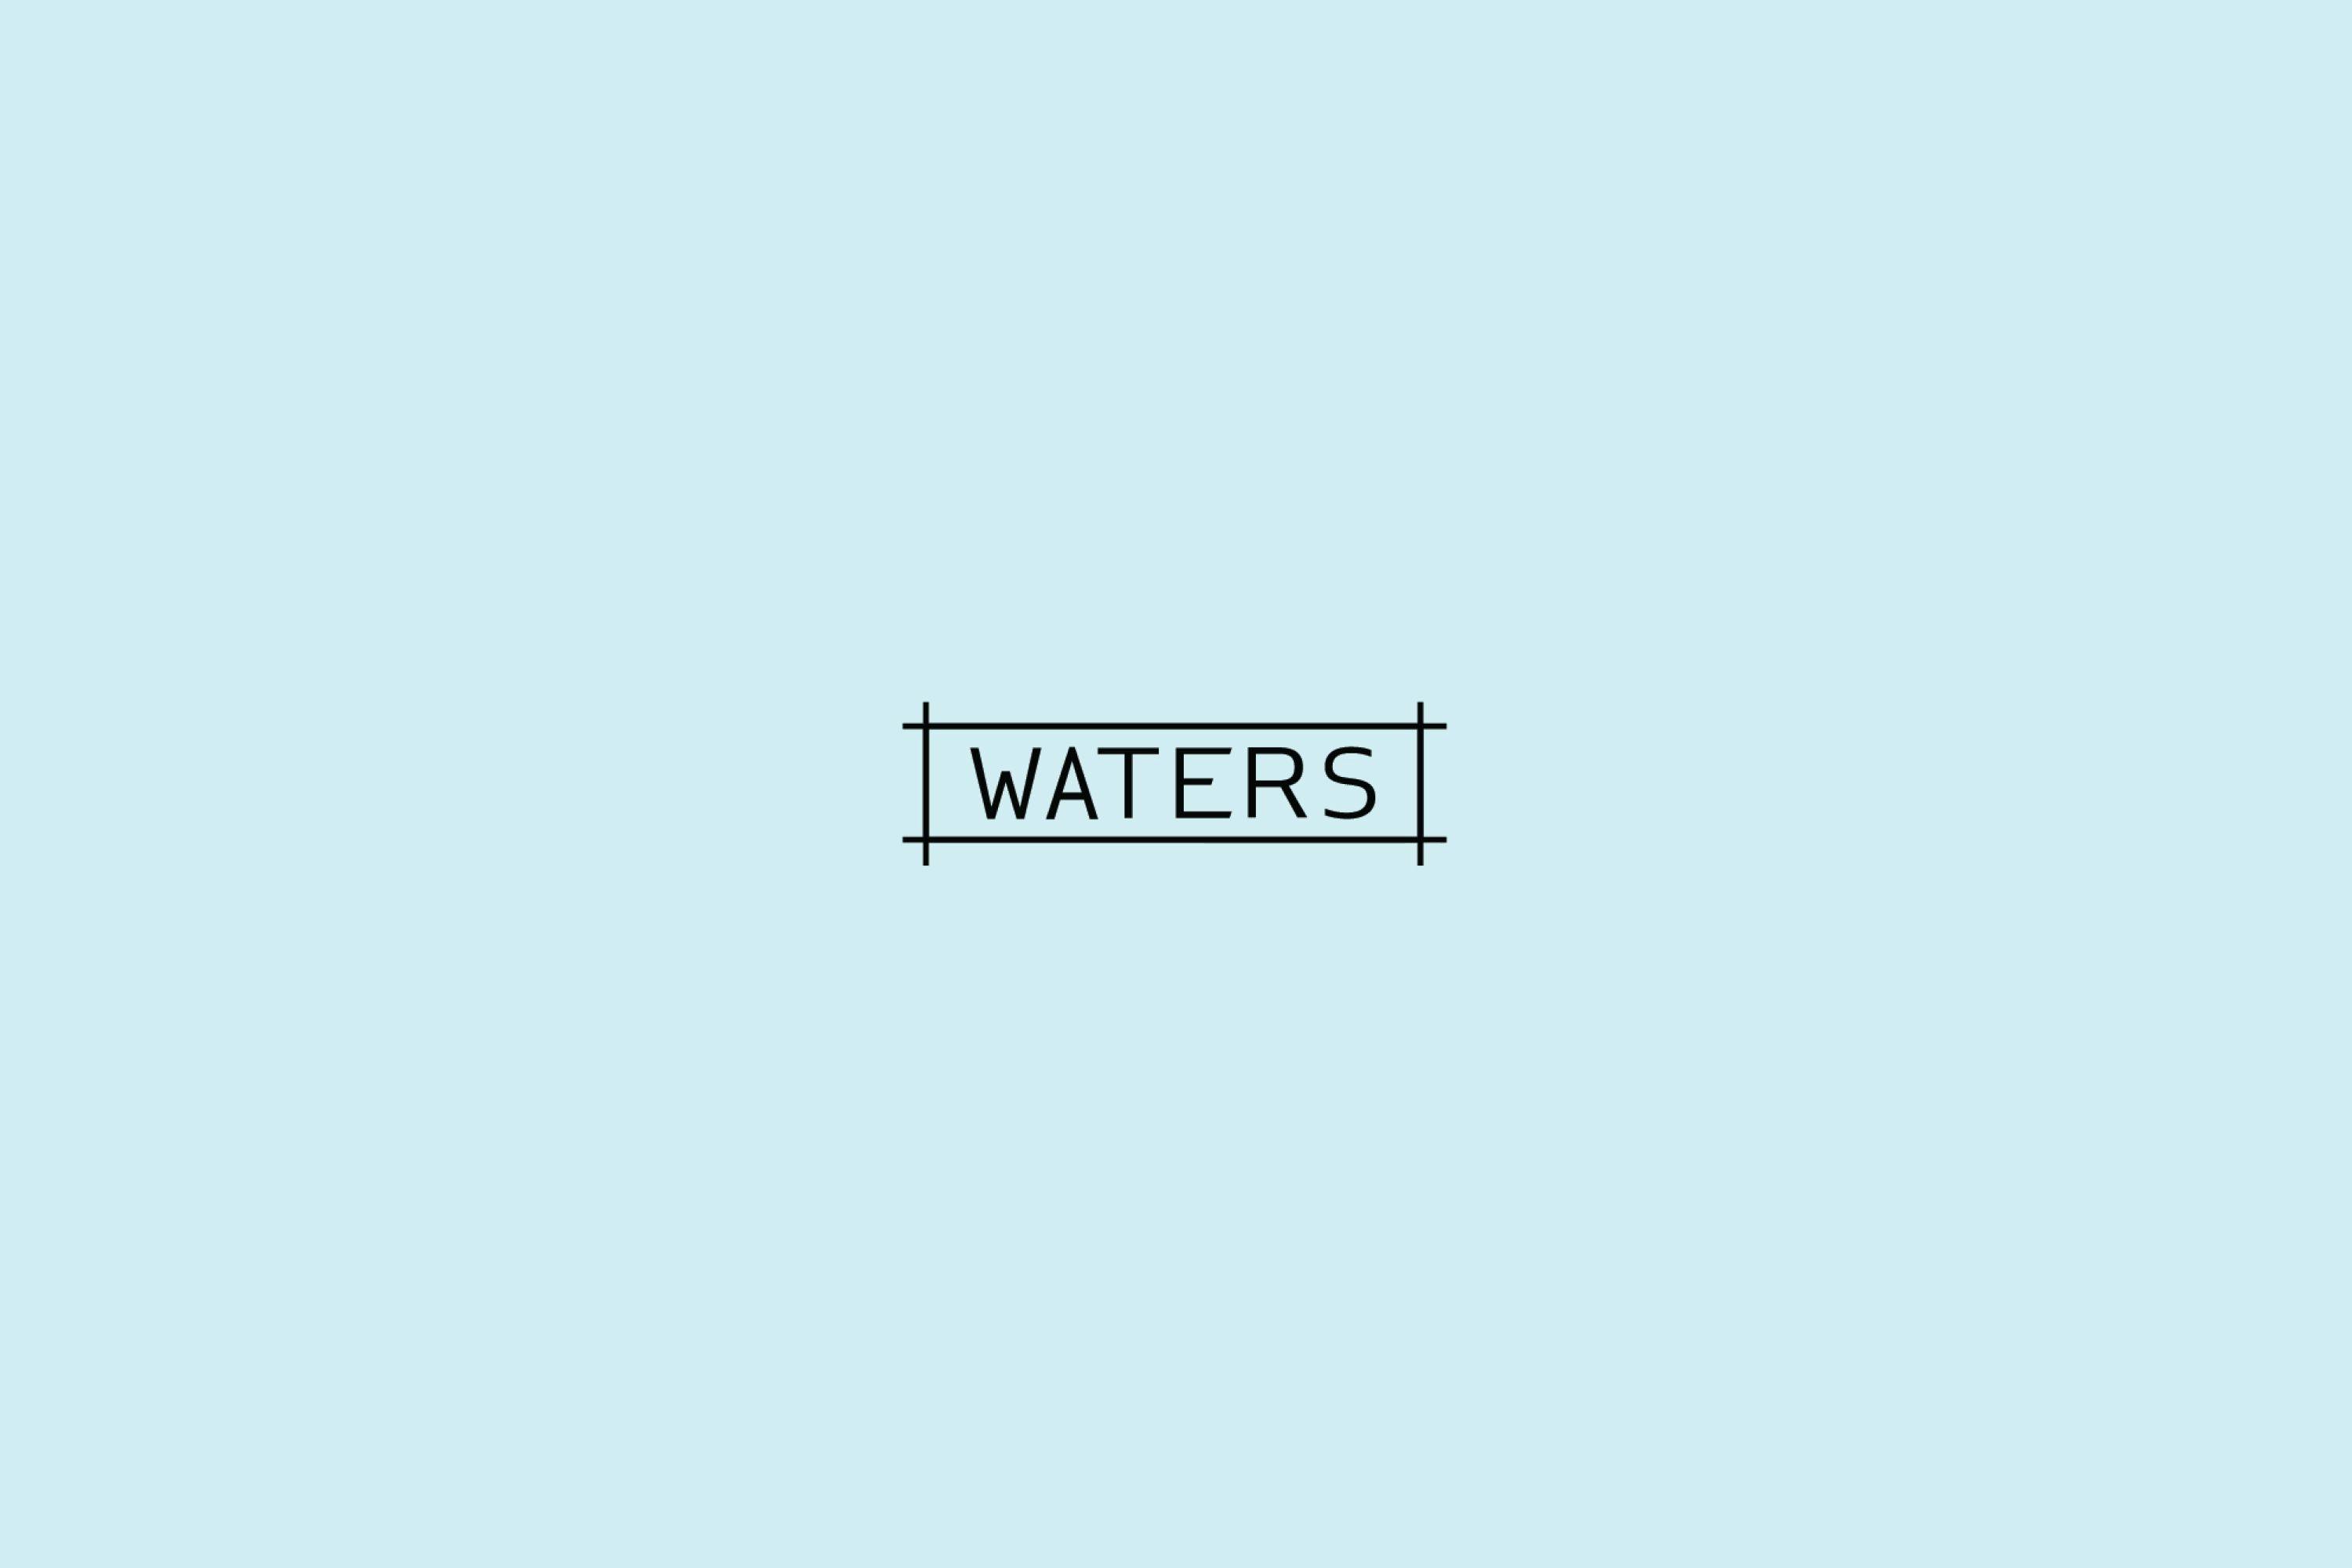 Waters written against a blue background